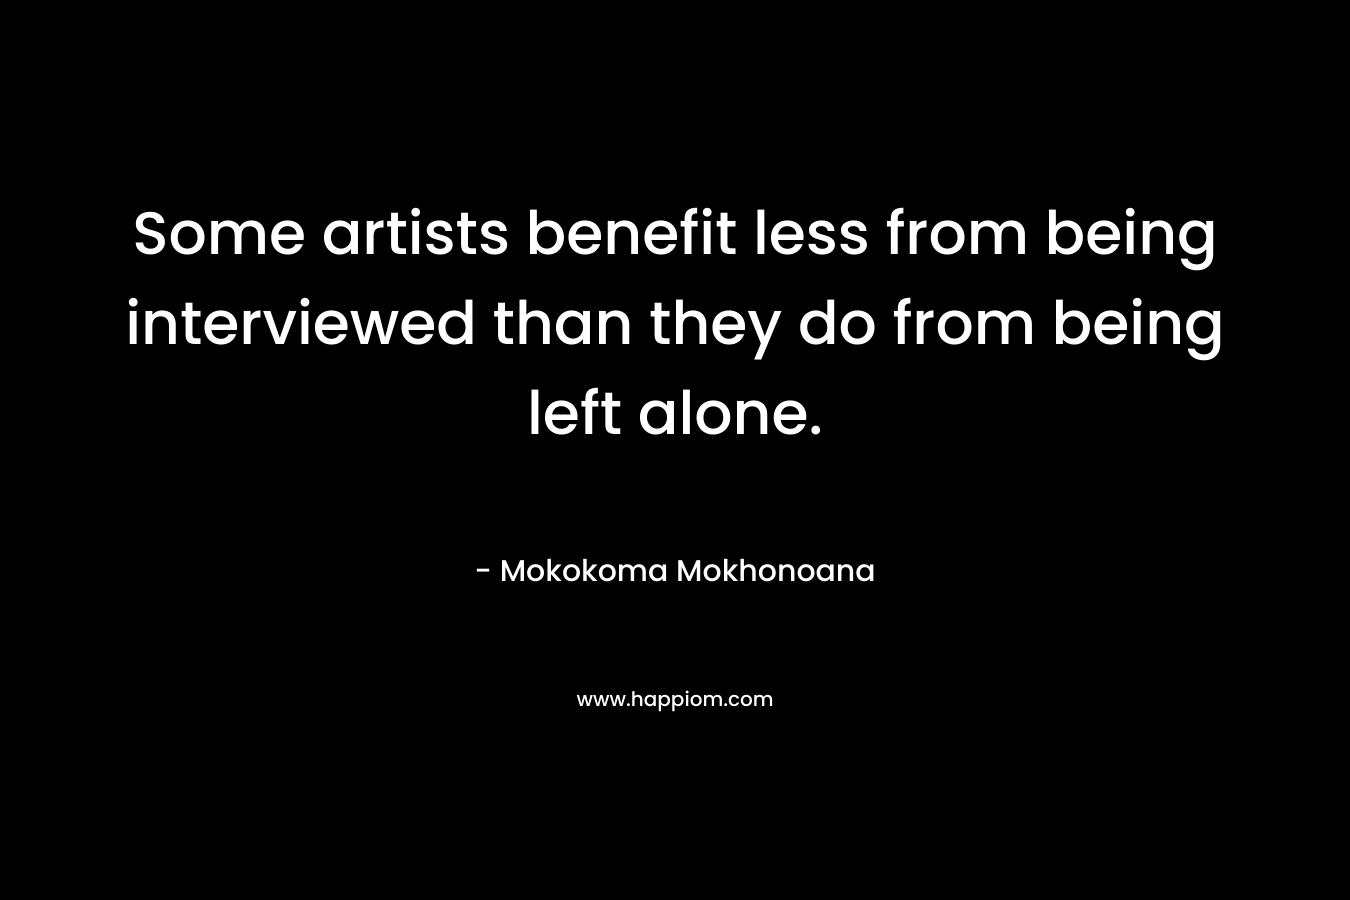 Some artists benefit less from being interviewed than they do from being left alone.